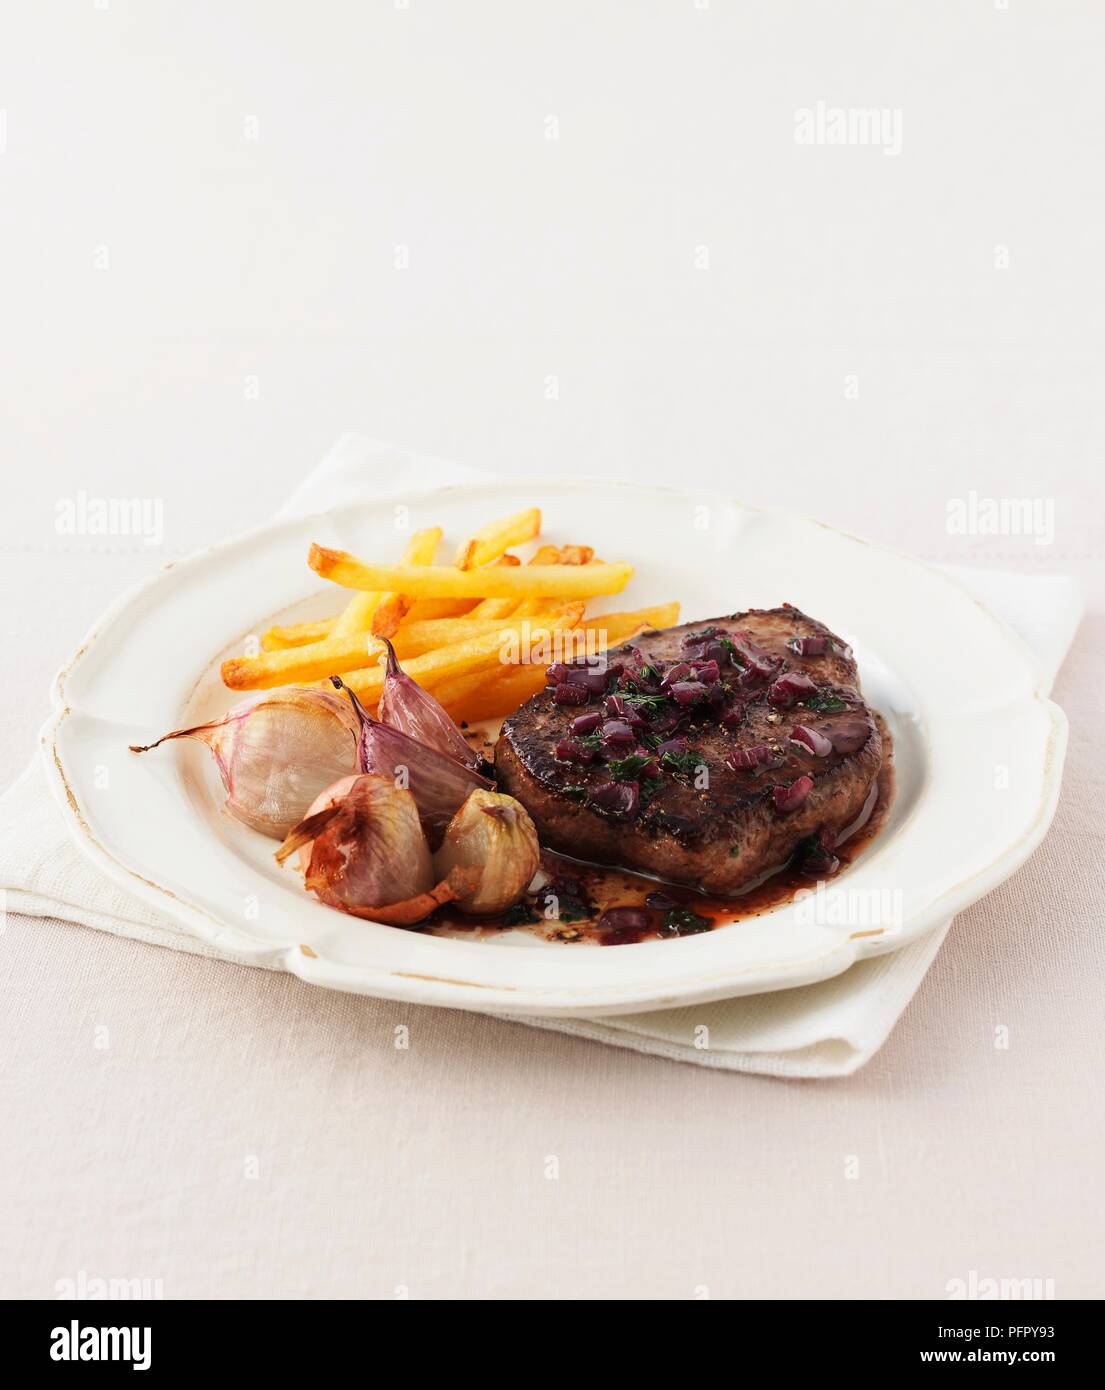 Minute steak with roasted garlic, red onions and French fries, on a plate Stock Photo